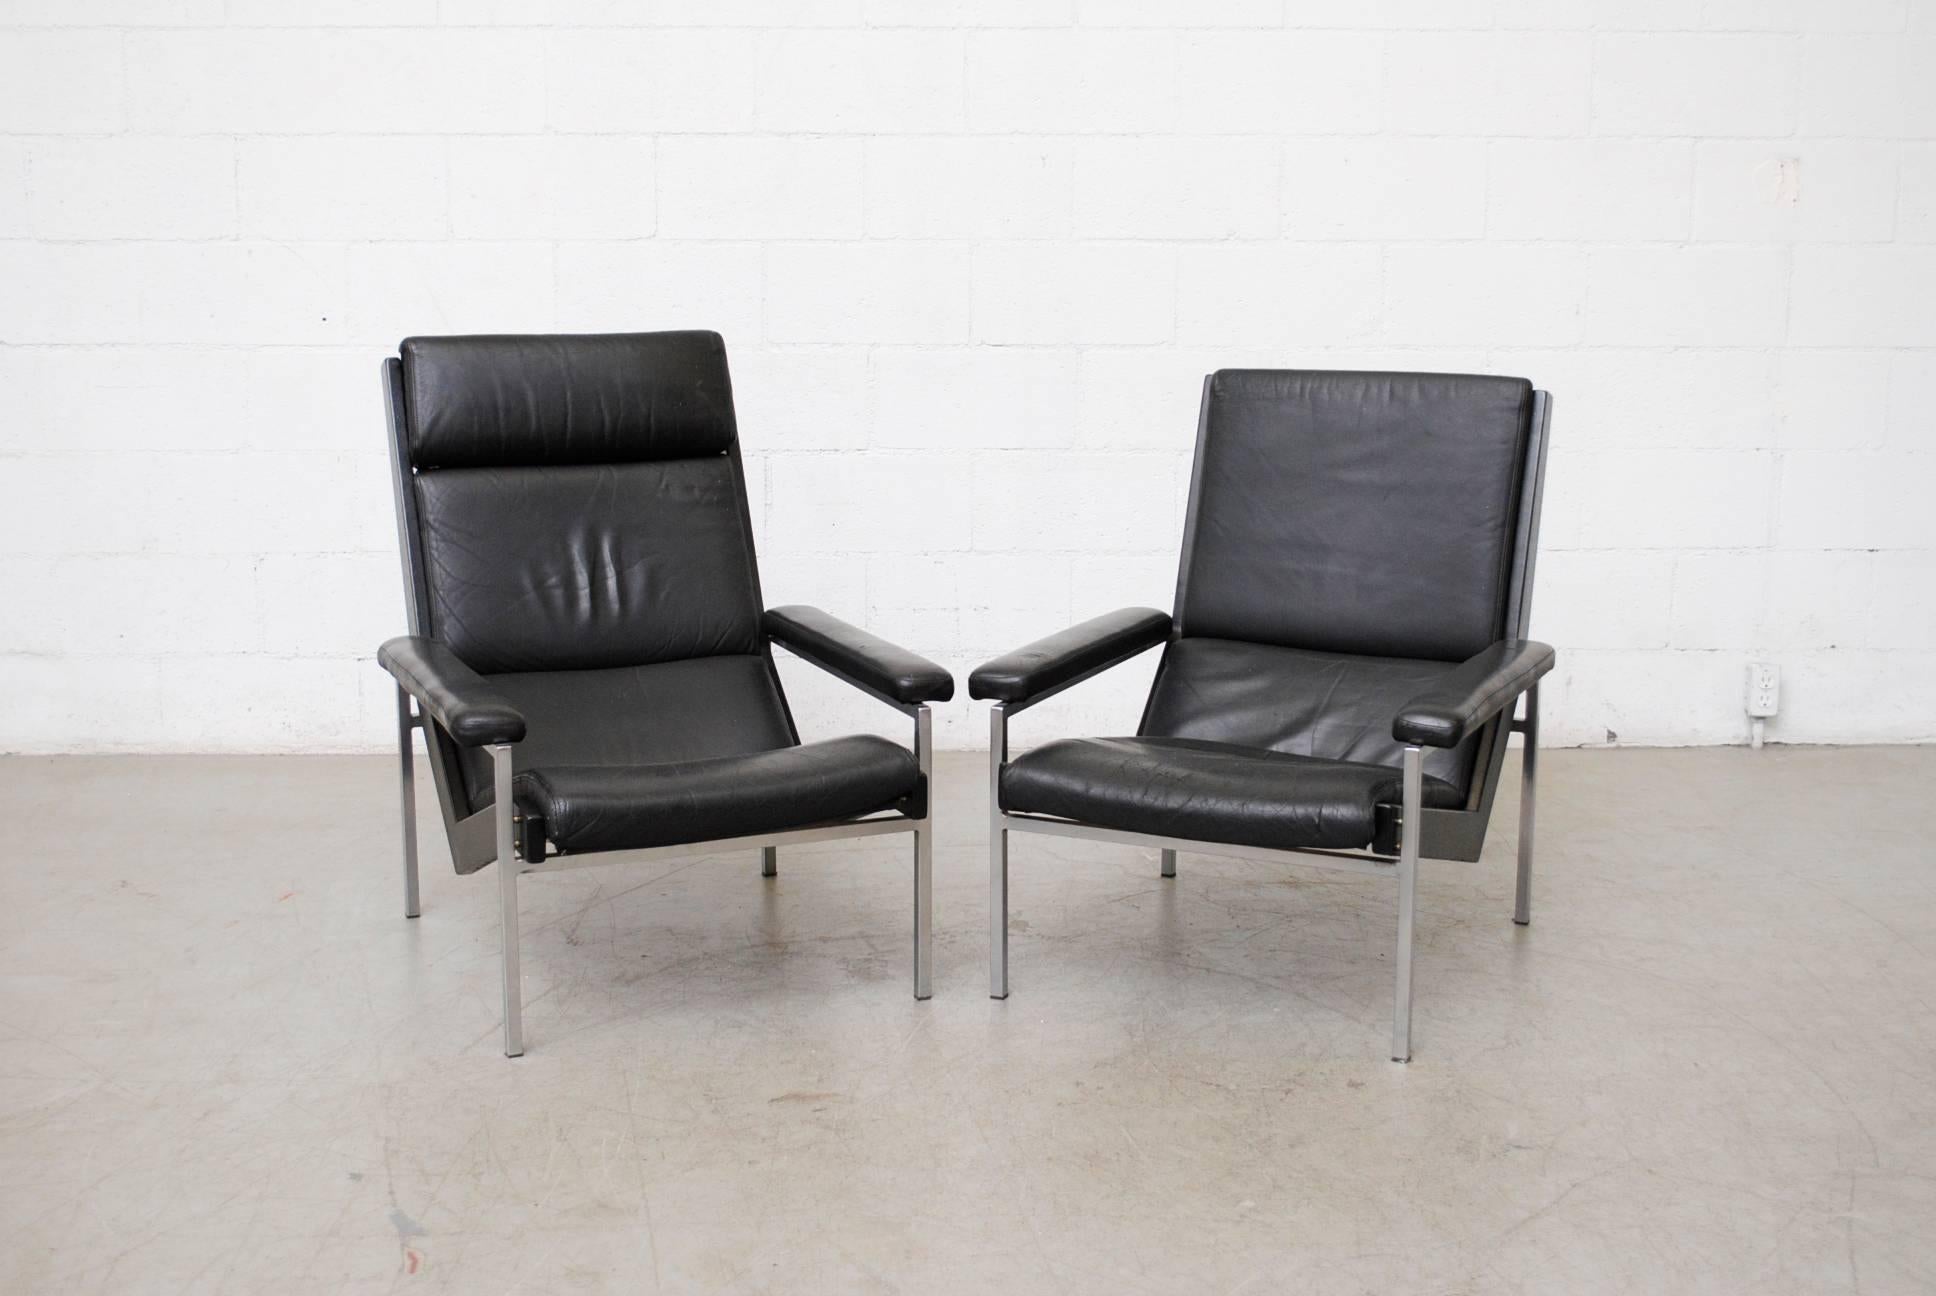 Pair of 'His and Hers' Robert Parry armchairs with leather seats and chrome frames. Leather in worn condition with visible wear, cracking and patina. Frames in good original condition. Set price. Hers measures 28 x 37.75 x 15 / 33.5.